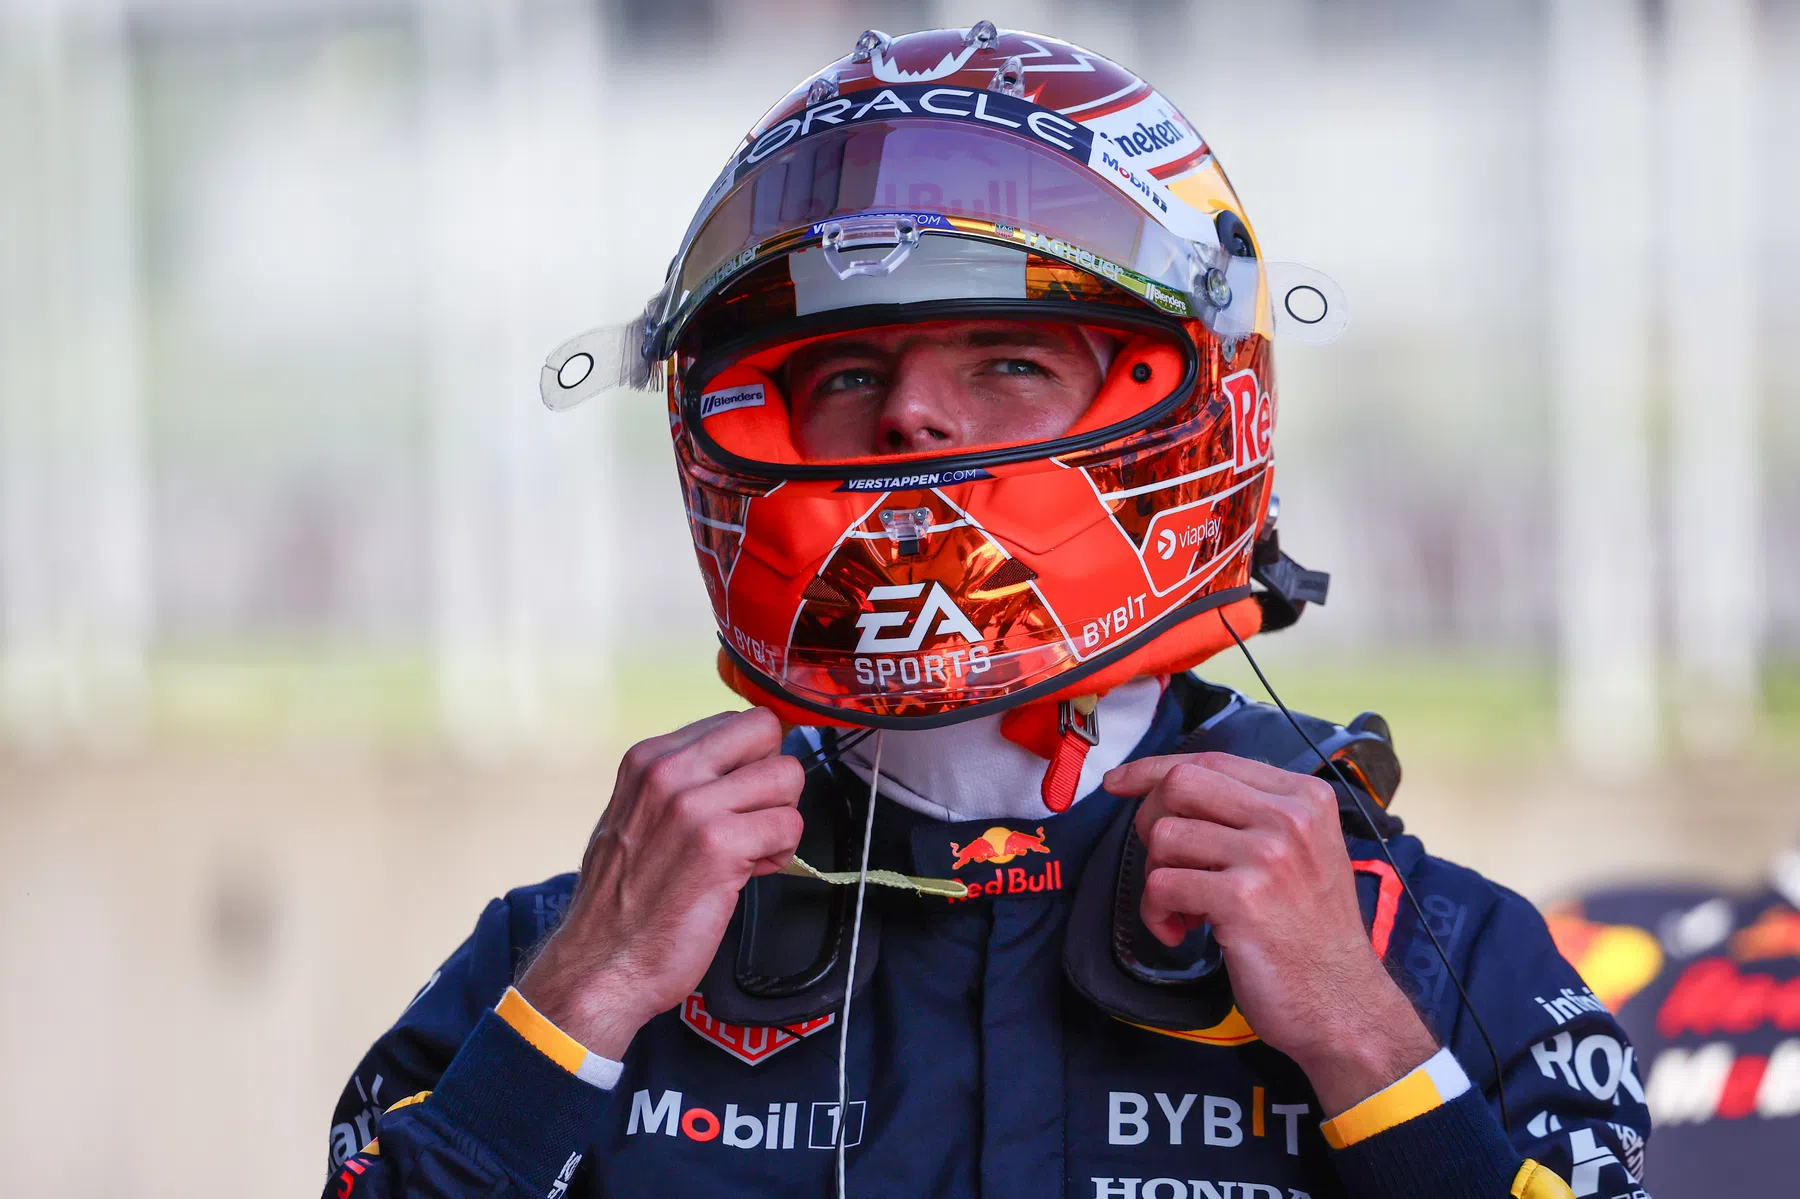 a day of turmoil in austria and not because of Max Verstappen